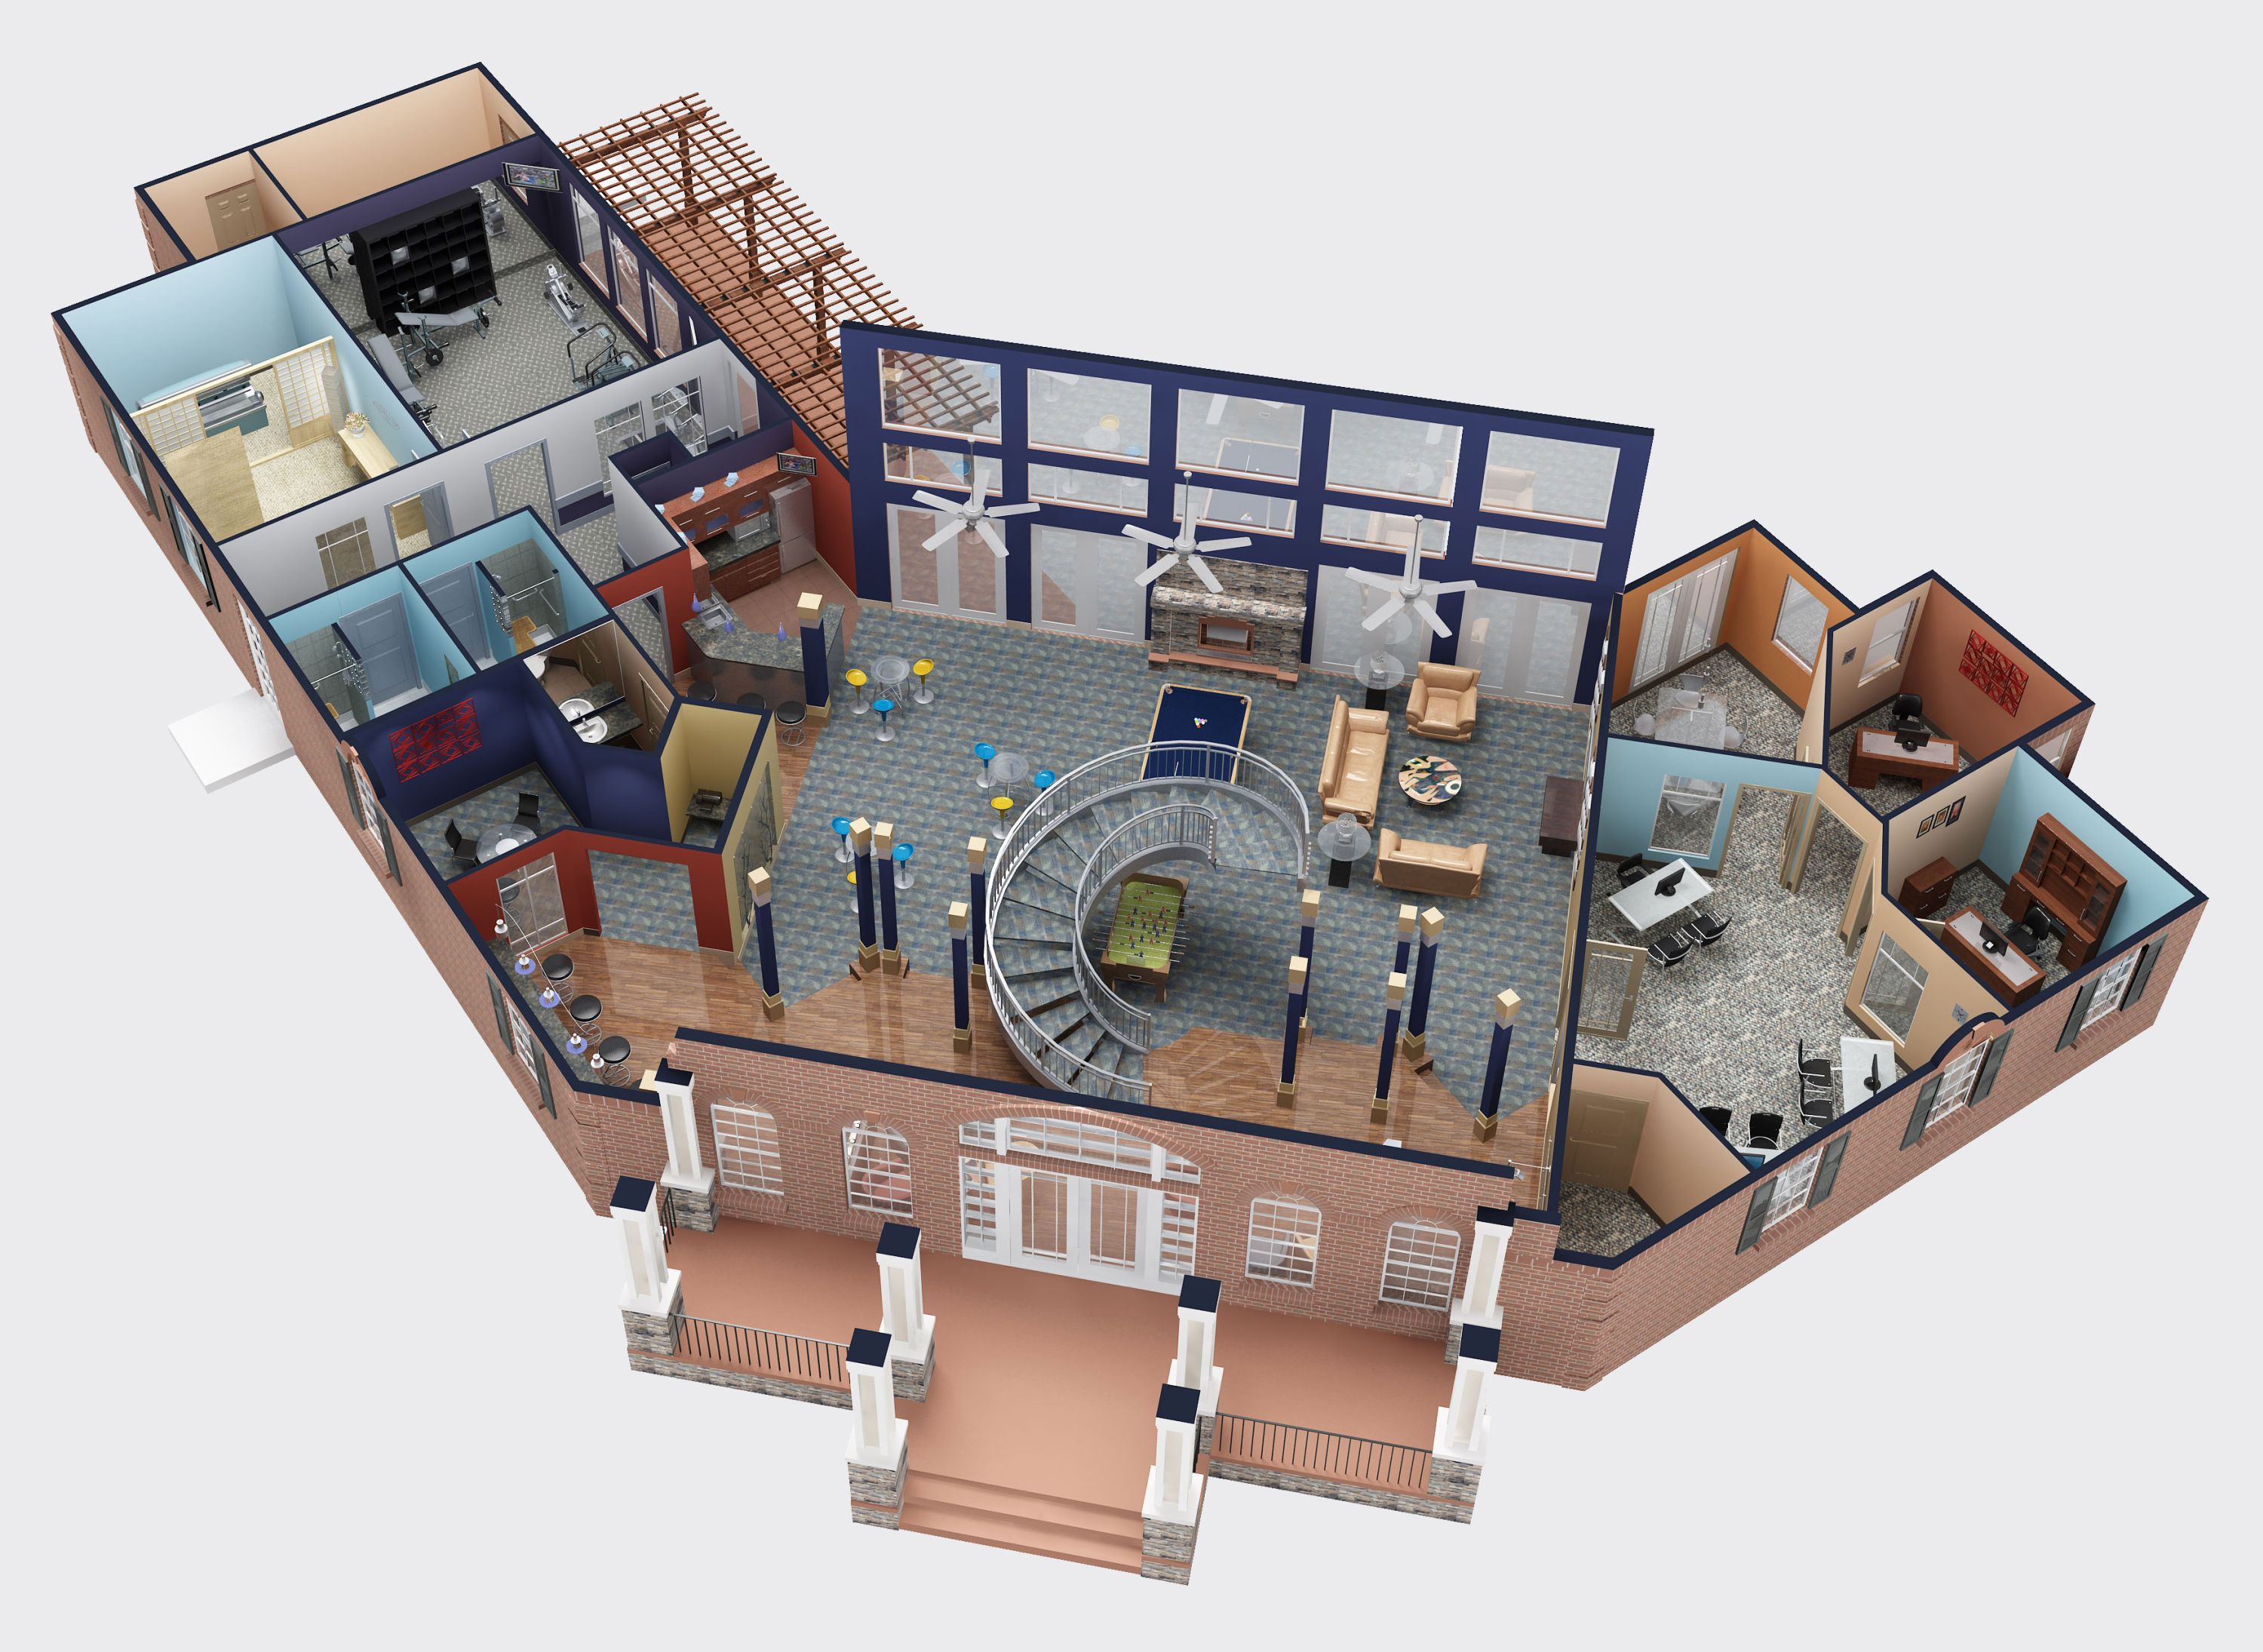 3d drawing software for house plans » Картинки и фотографии дизайна